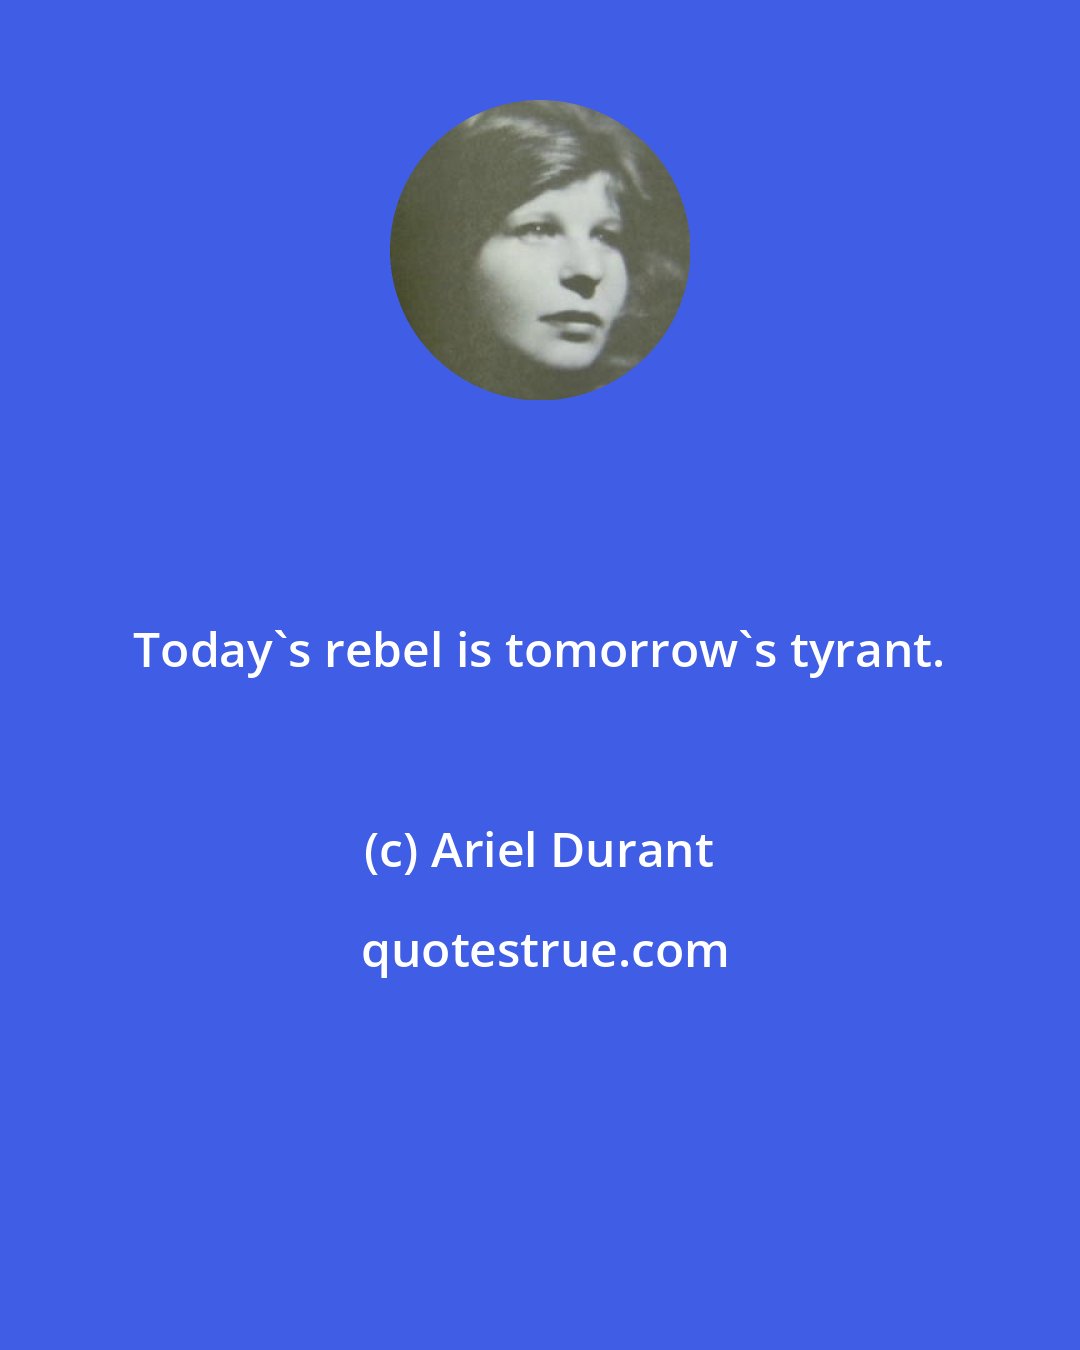 Ariel Durant: Today's rebel is tomorrow's tyrant.